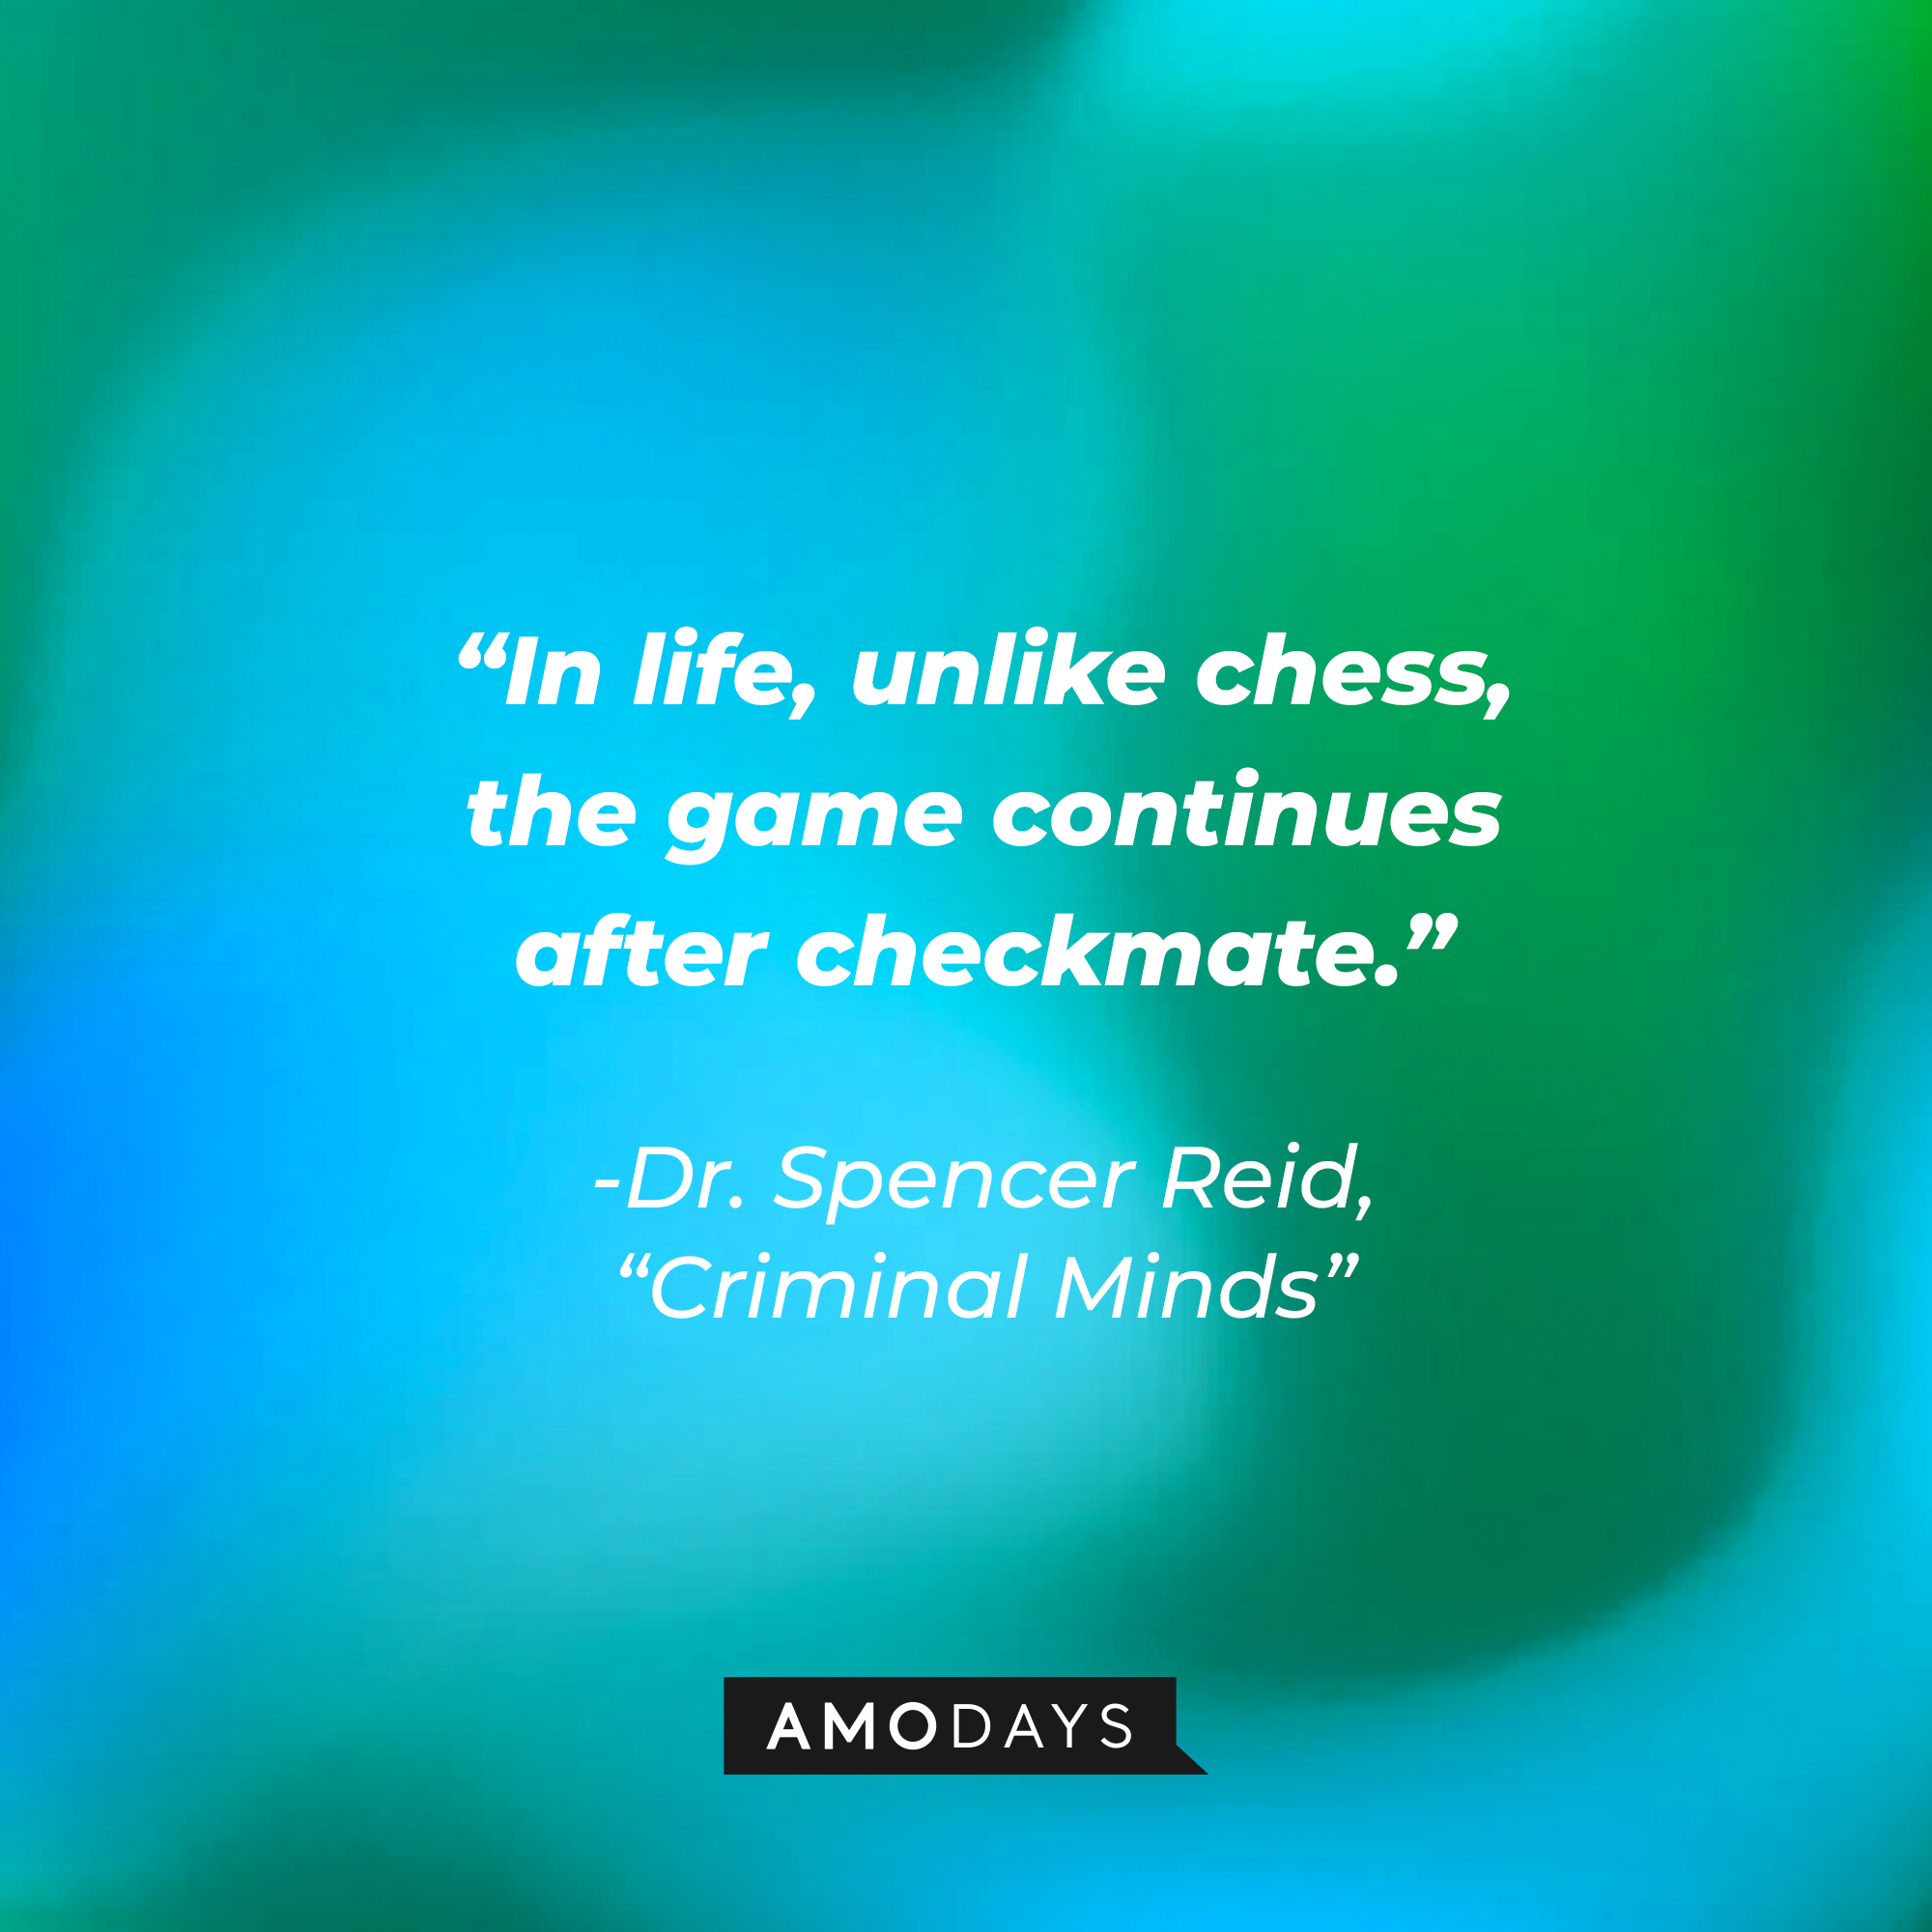 Dr. Spencer Reid's quote: “In life, unlike chess, the game continues after checkmate.” | Source: Amodays